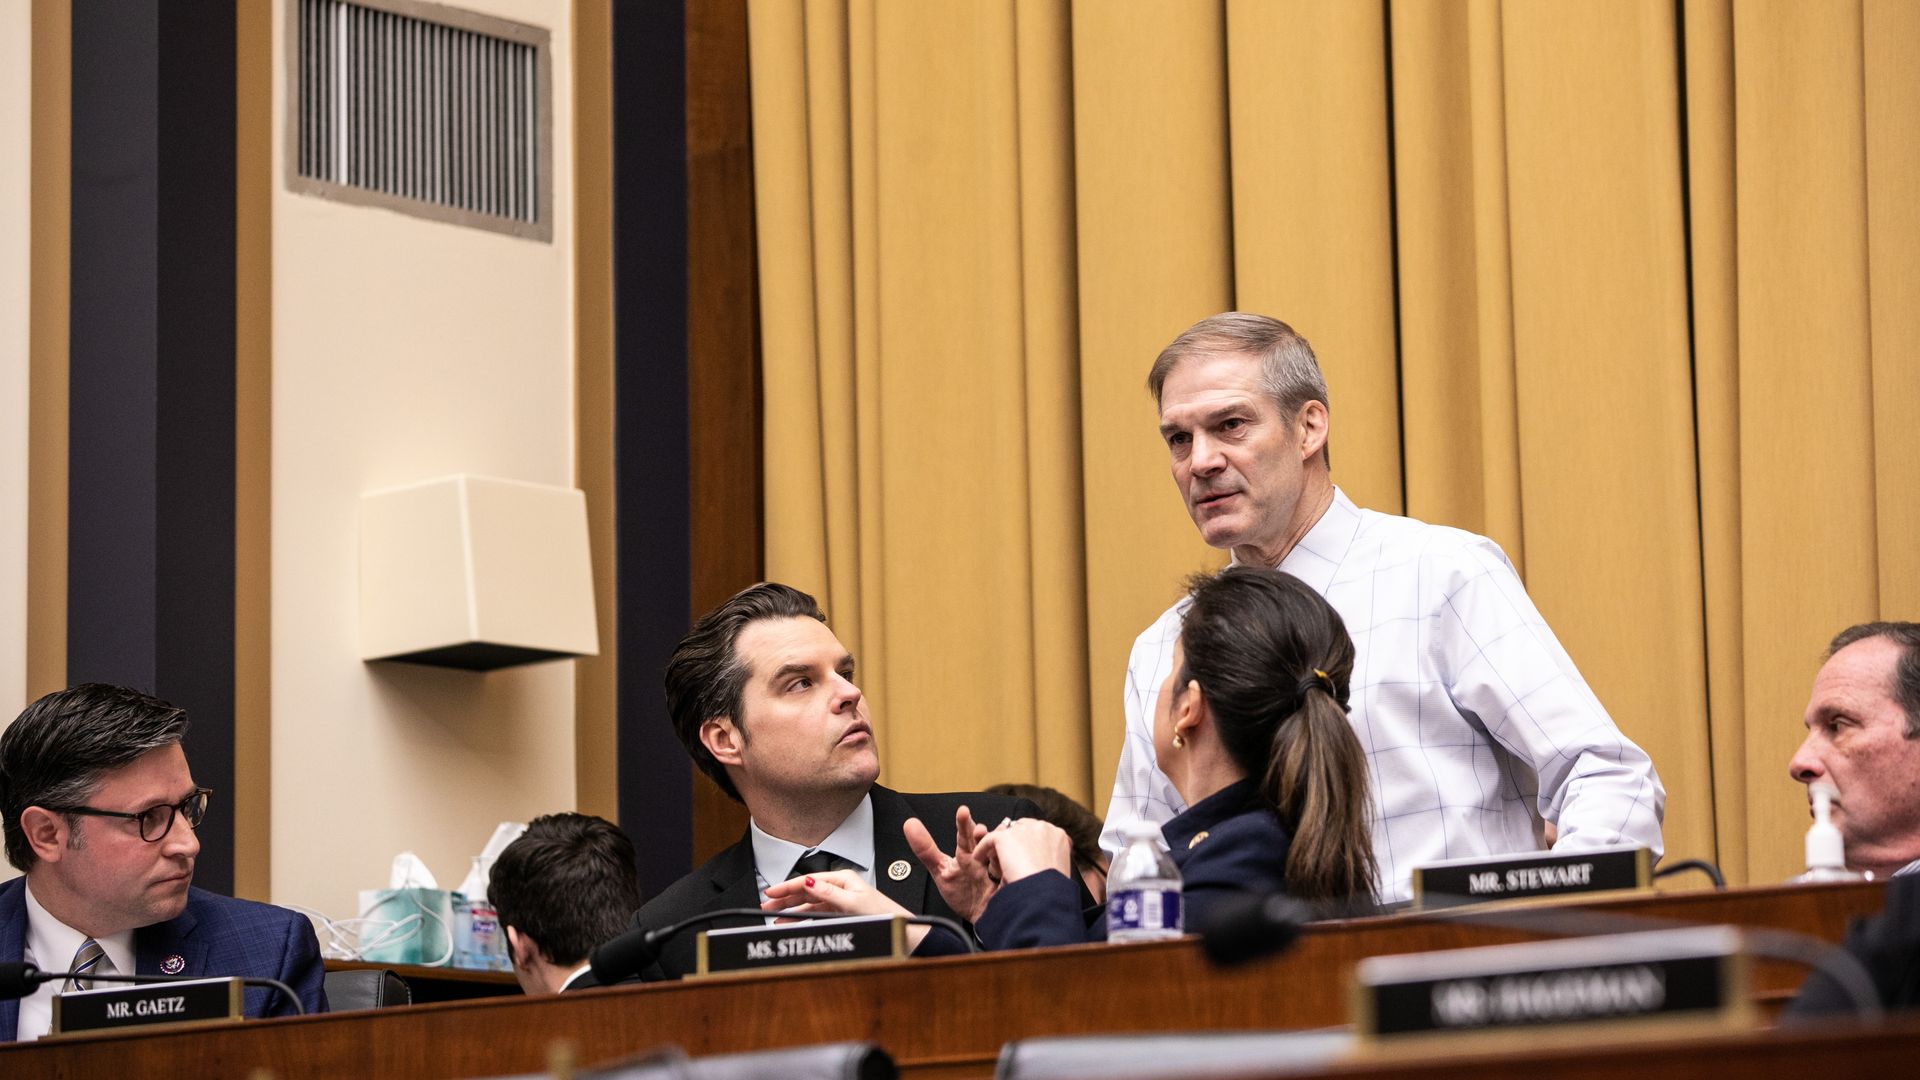 House Judiciary Committee Chair Jim Jordan, wearing a white shirt, speaking to members of the panel behind the dais at a committee hearing.